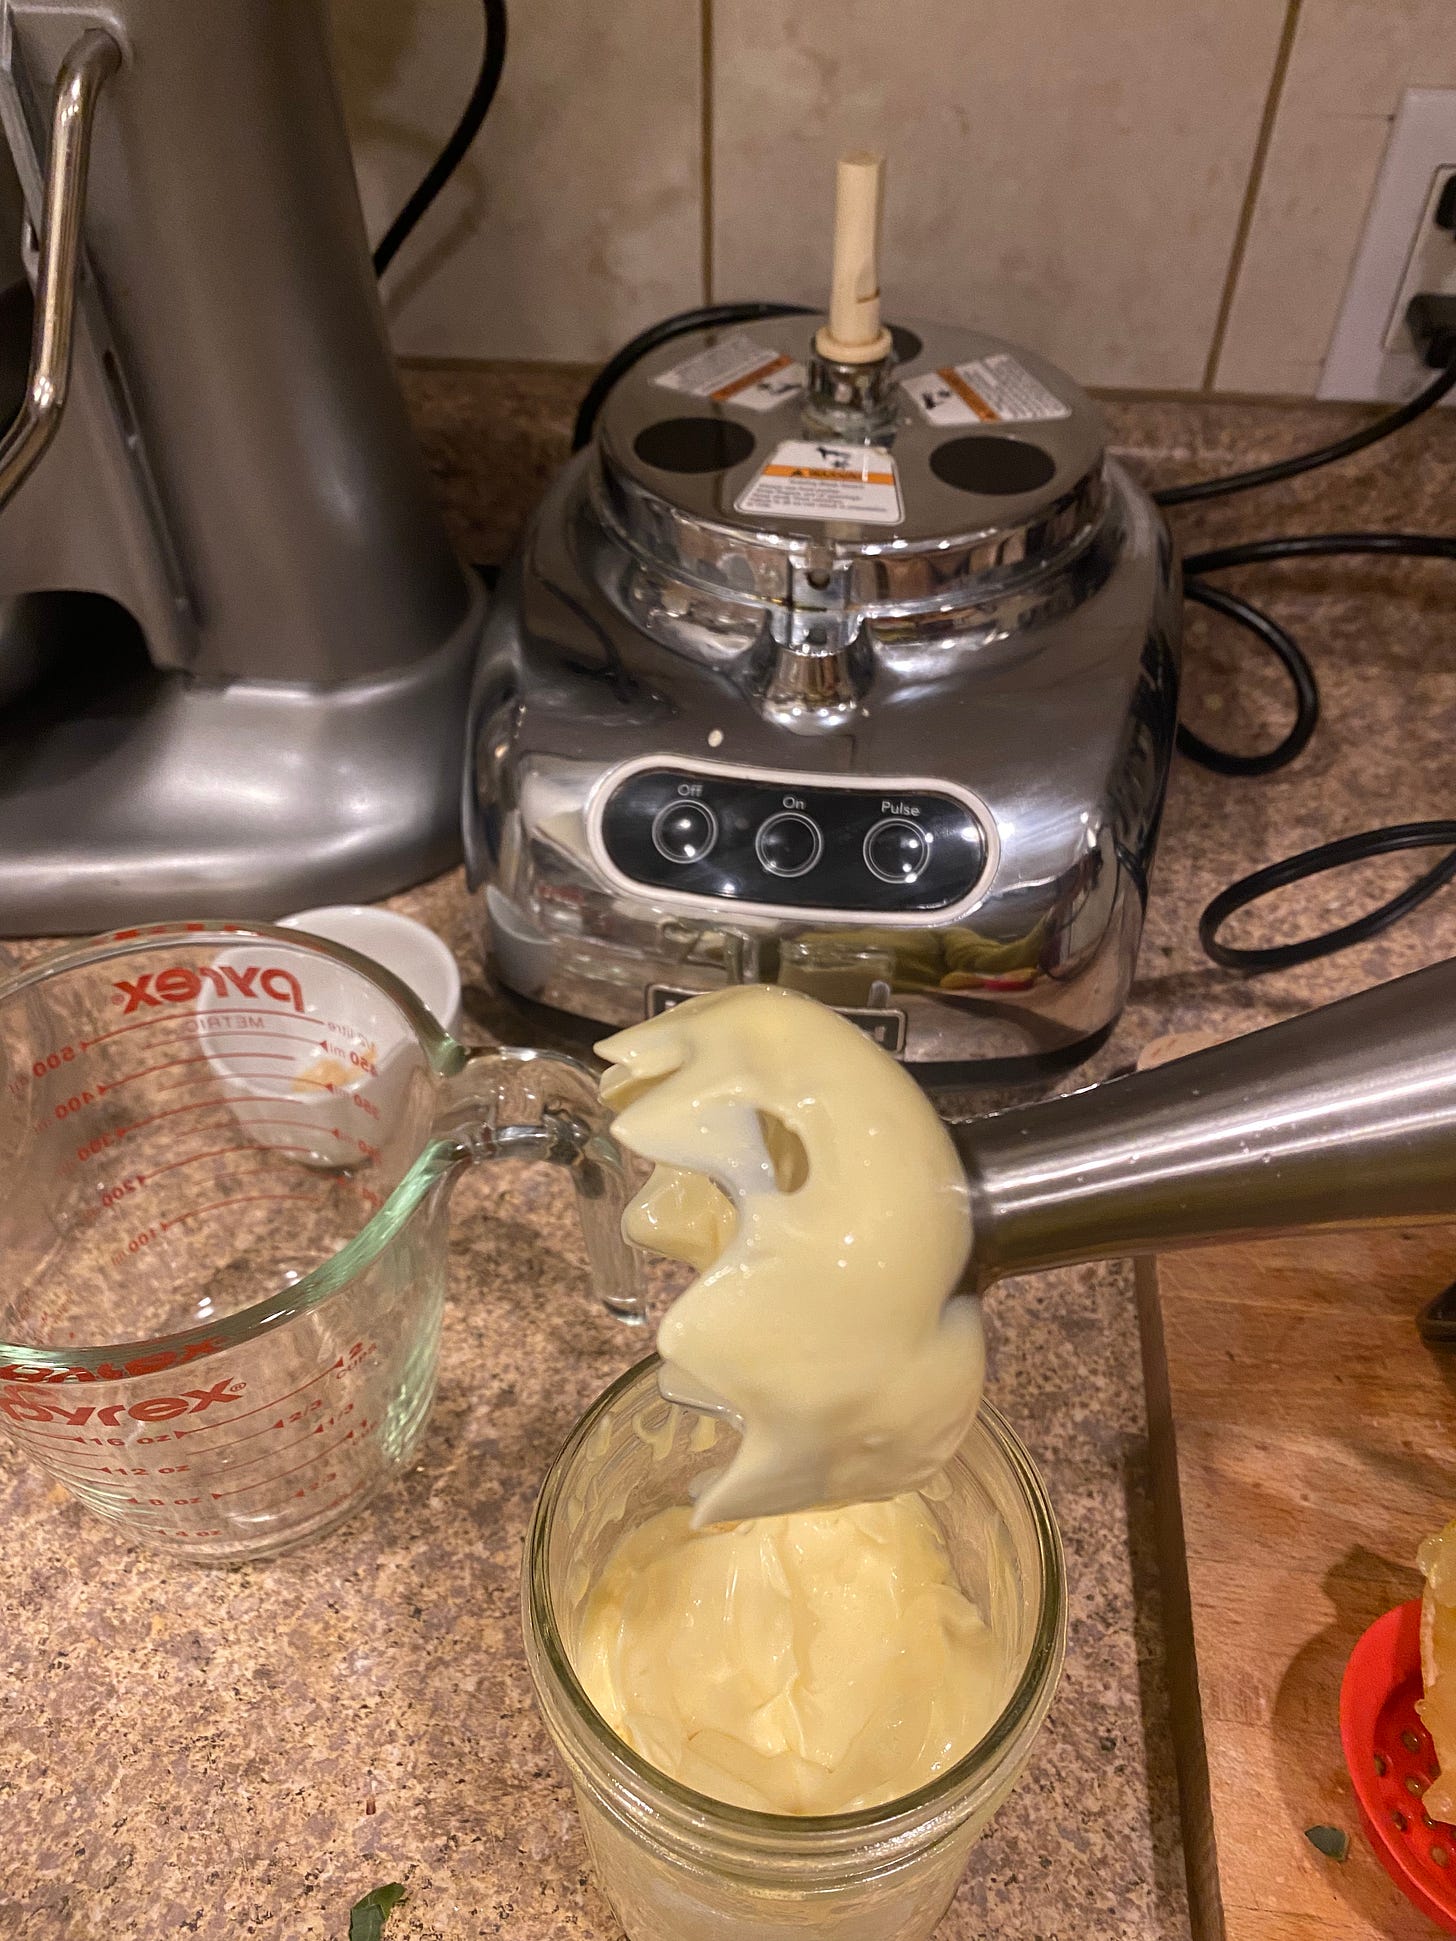 A wide-mouth glass mason jar with mayo in it. Above it, an immersion blender shows the texture of the mayonnaise. The counter behind the jar shows a measuring cup, the base of a food processor, and the edge of a cutting board with a lemon at its corner.